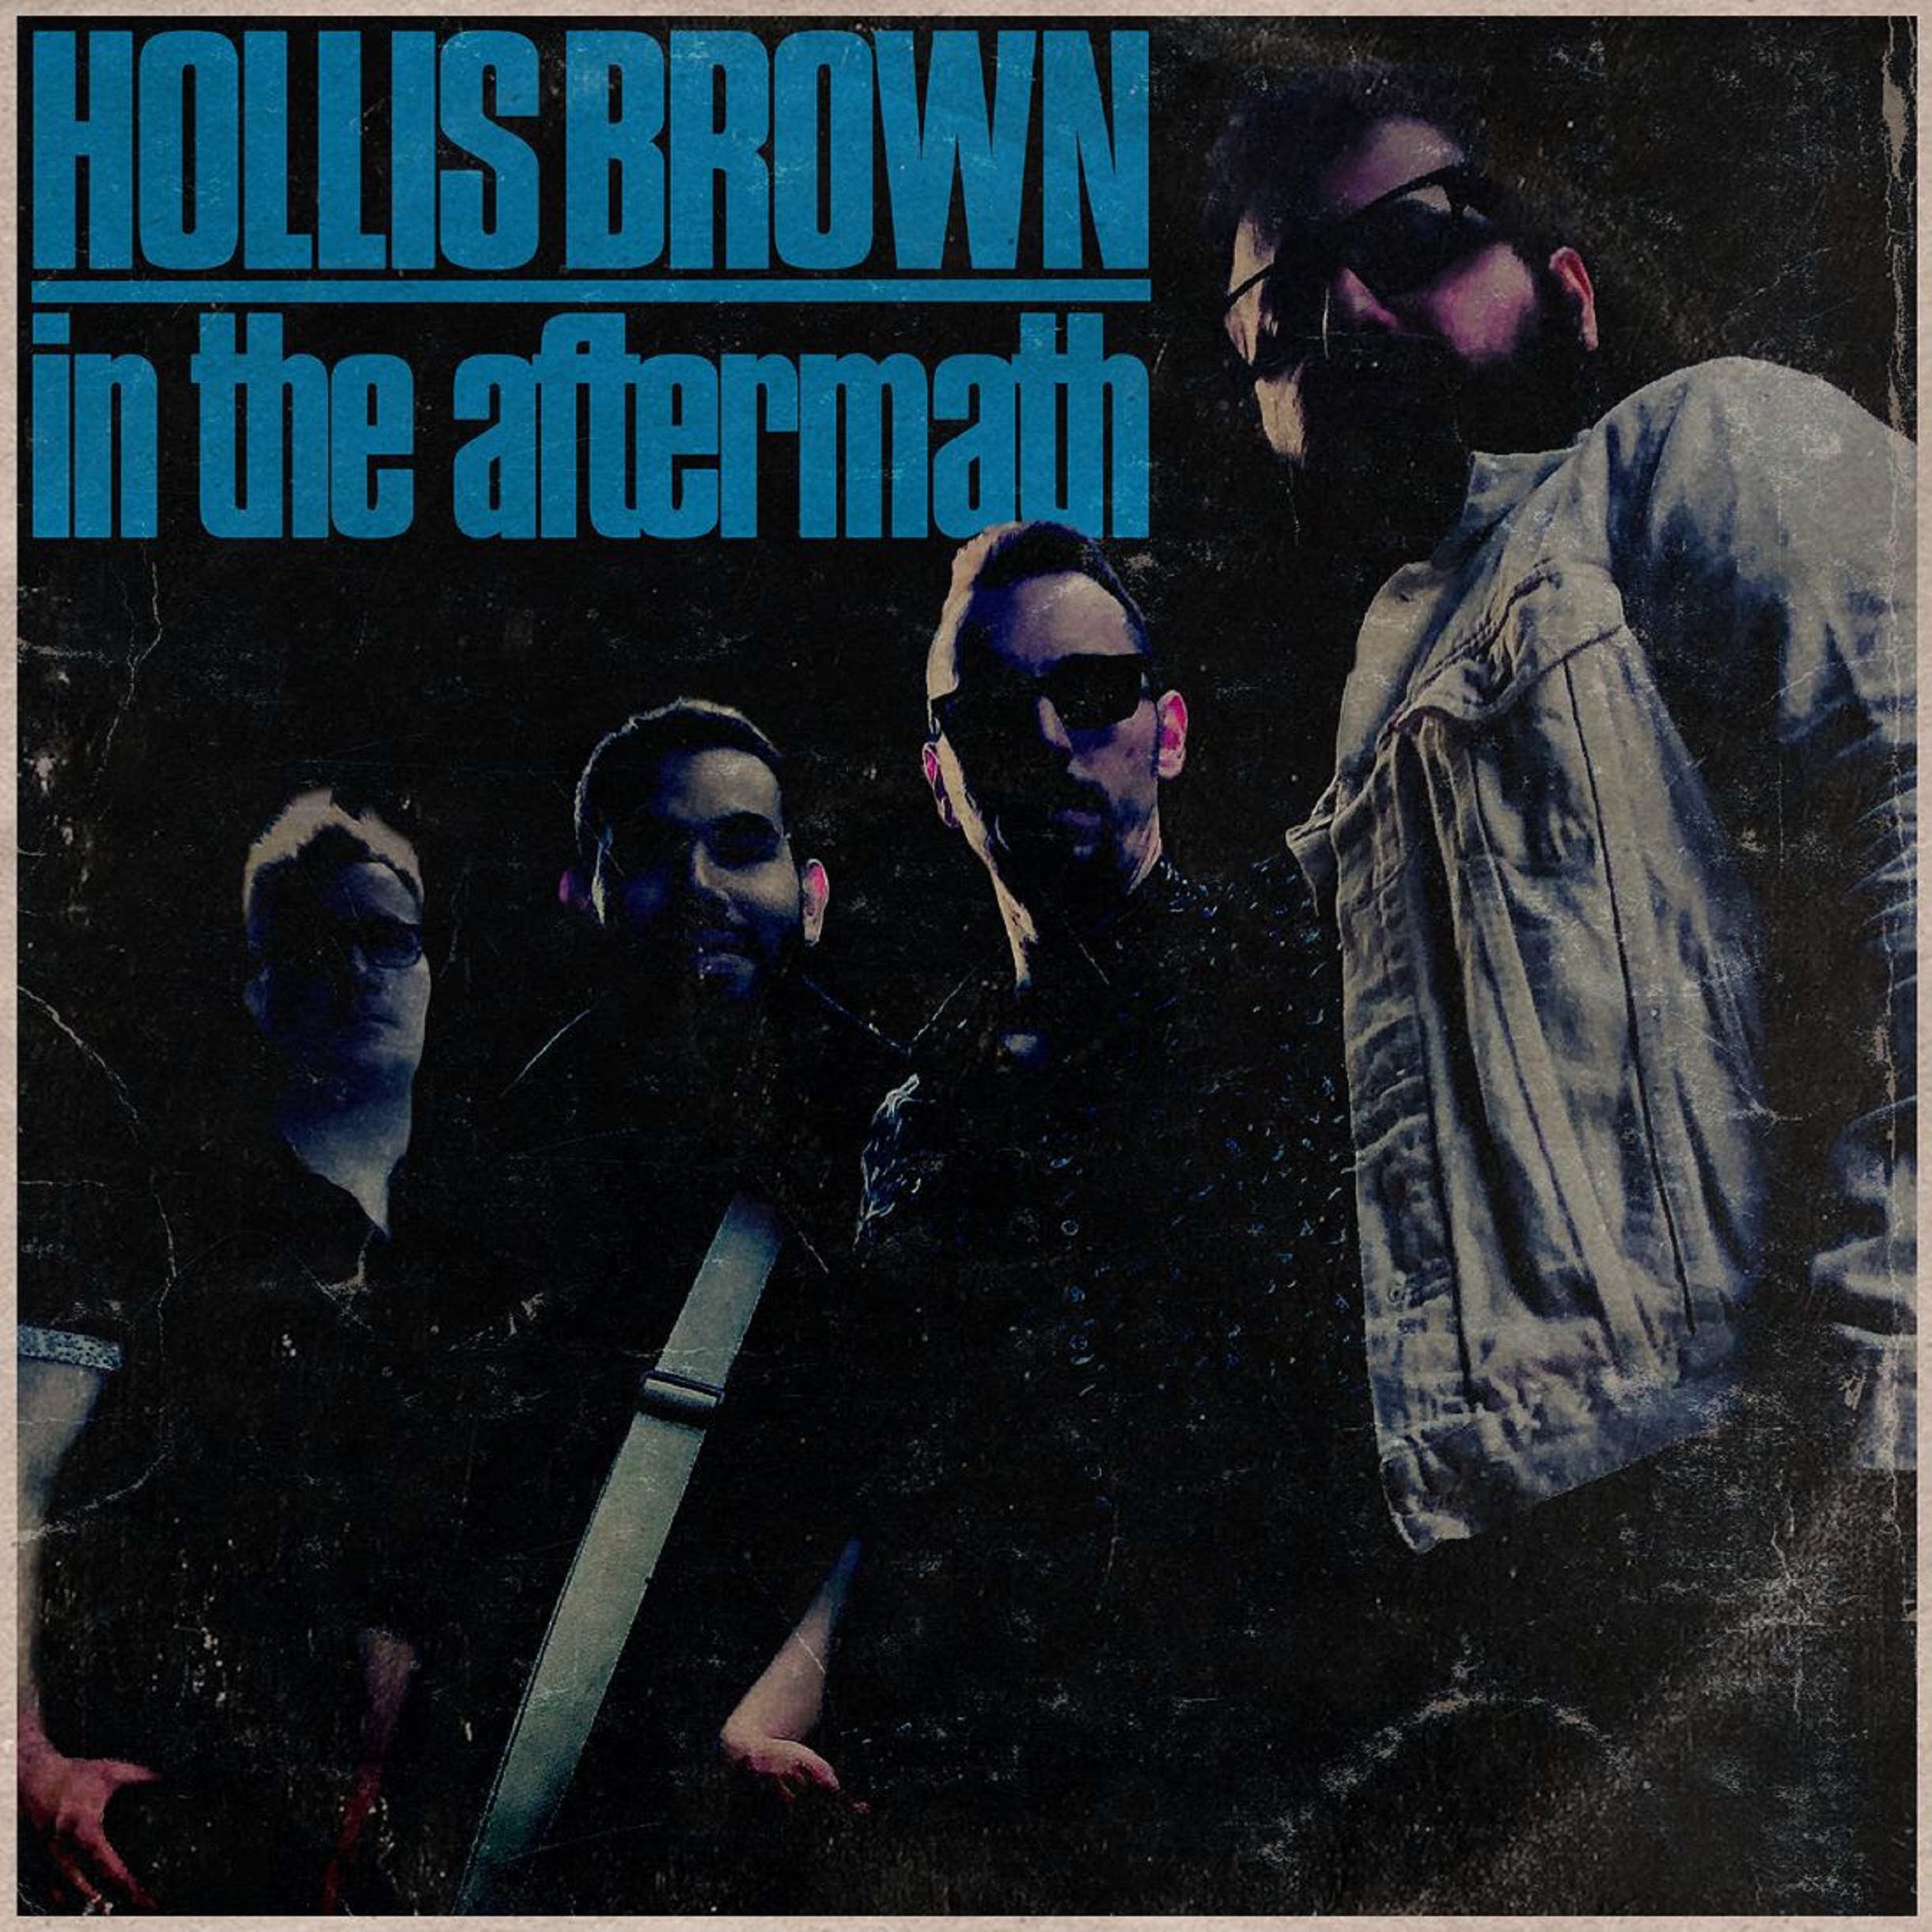 Rolling Stones' Seminal First Original Album Recreated By Hollis Brown, Out 2/4